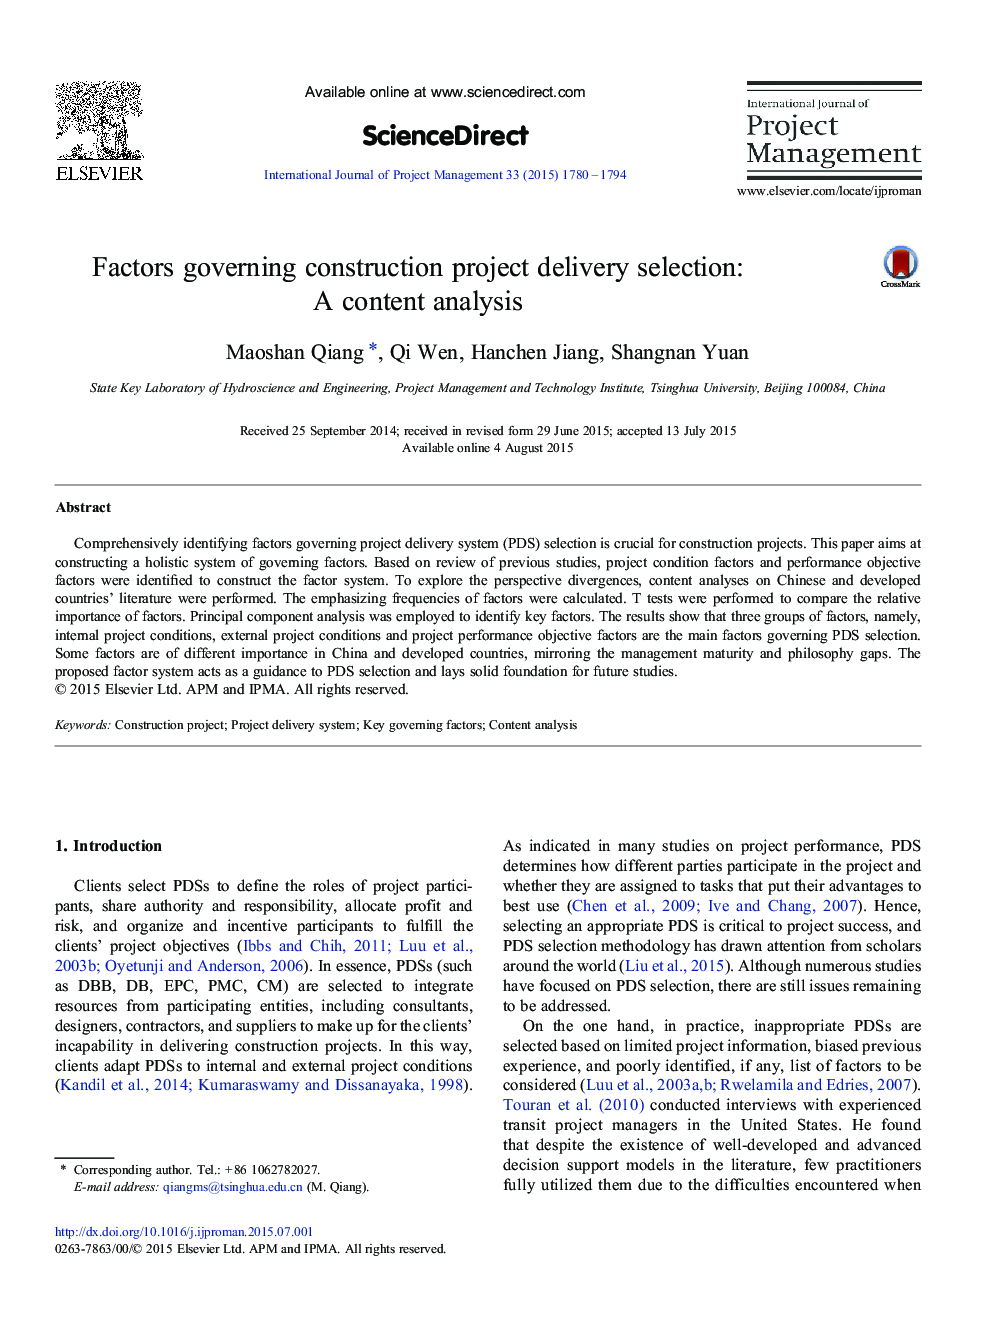 Factors governing construction project delivery selection: A content analysis